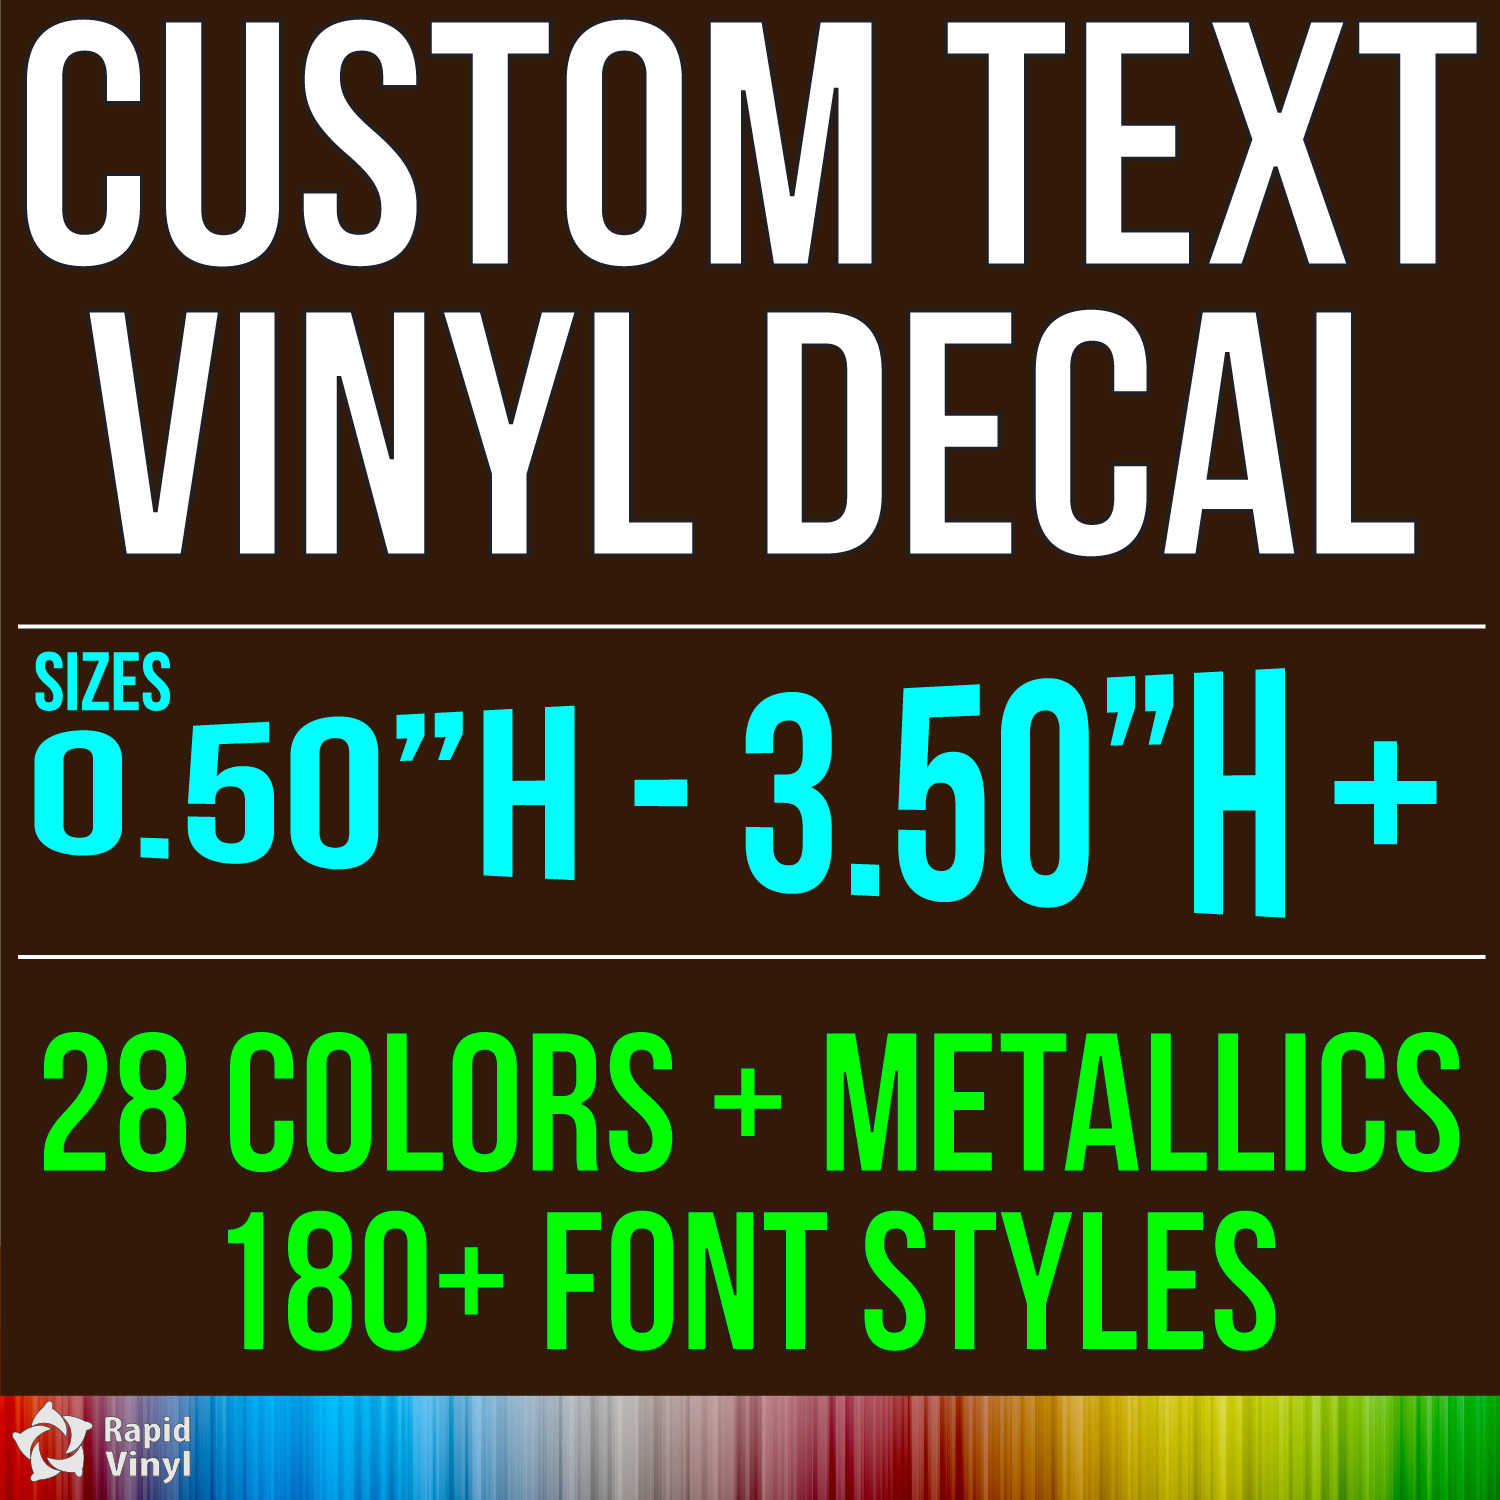 Custom Vinyl Lettering Text Transfer Decal Sticker Window Business Name Car Boat